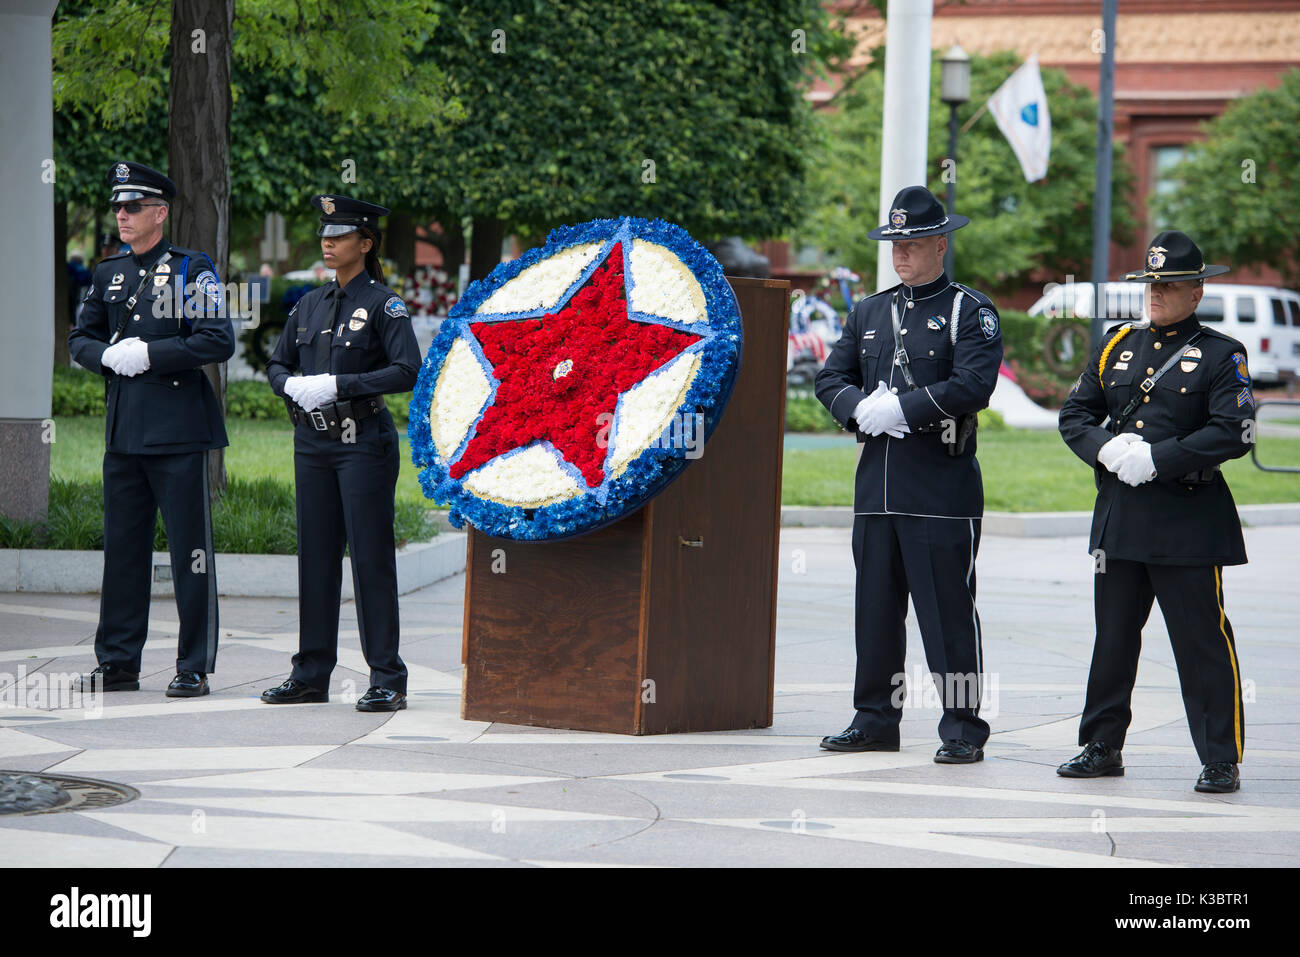 Honor Guard at National Police Week, Washington DC. Officers, relatives, friends, concerned citizens pay respect to fallen on duty law enforcement. Stock Photo